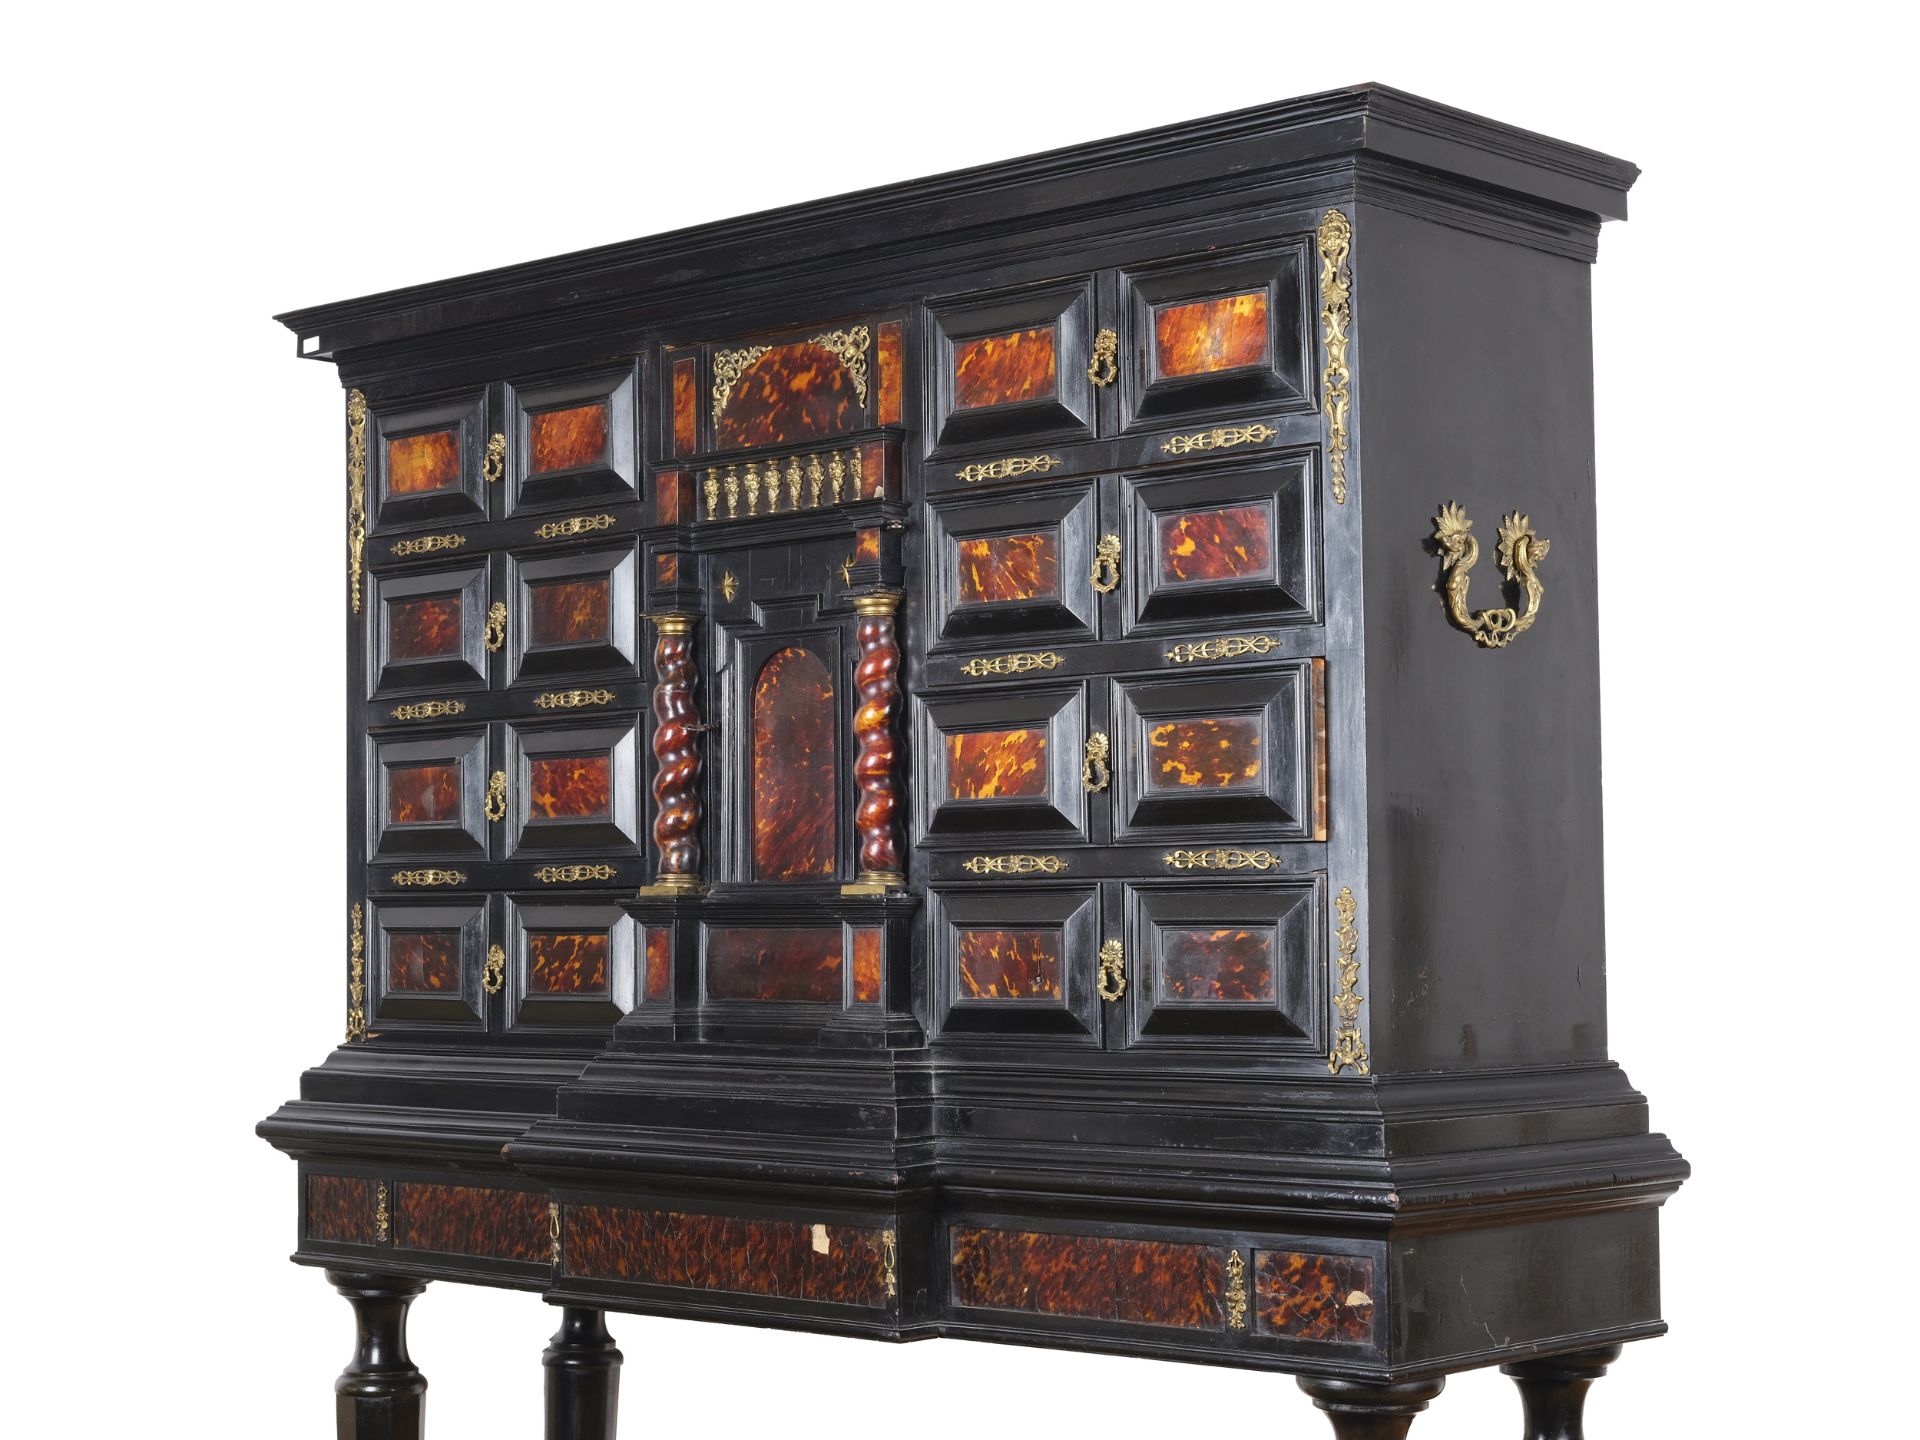 Top cabinet, German or Flemish, in the style of the 17th century - Image 3 of 7